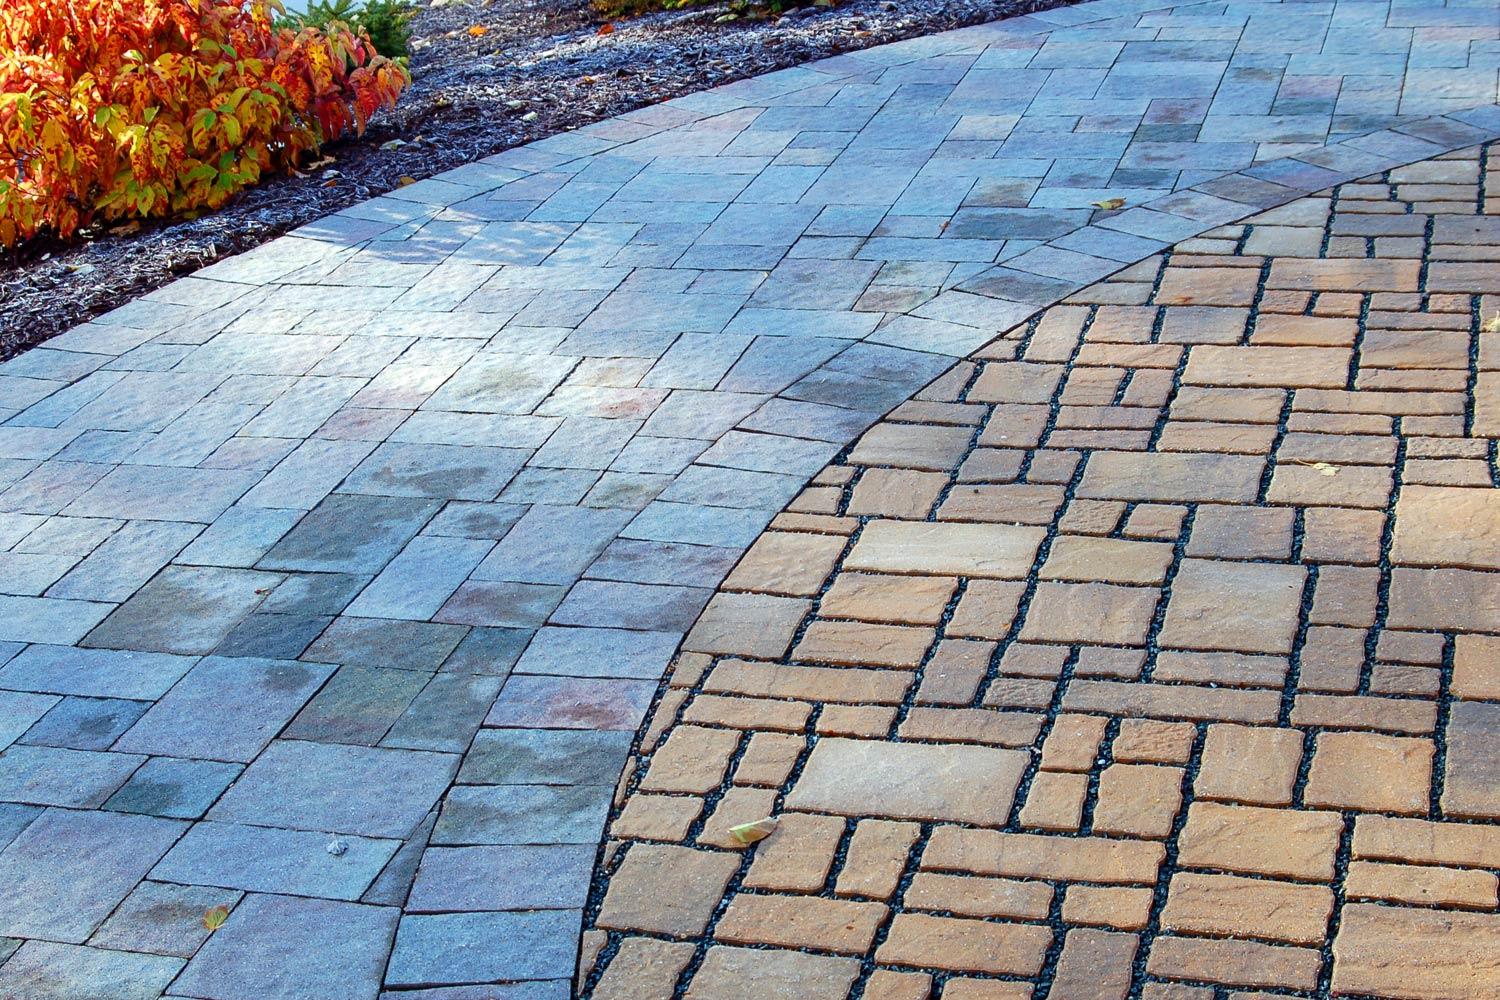 up close view of permeable pavers